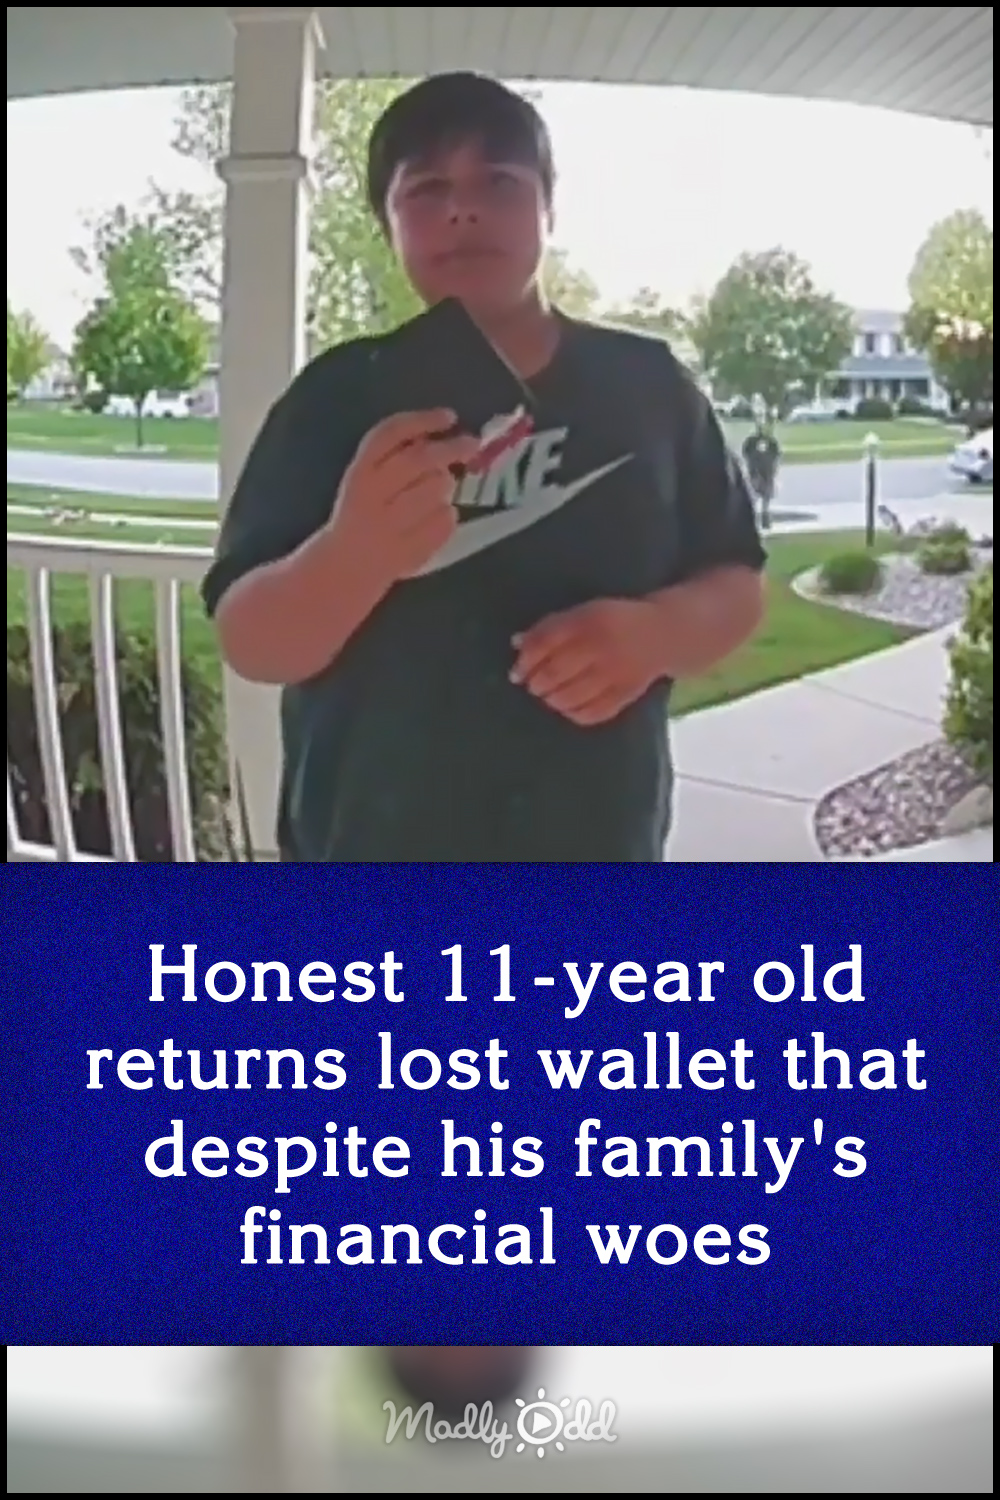 Honest 11-year old returns lost wallet despite his family\'s financial woes